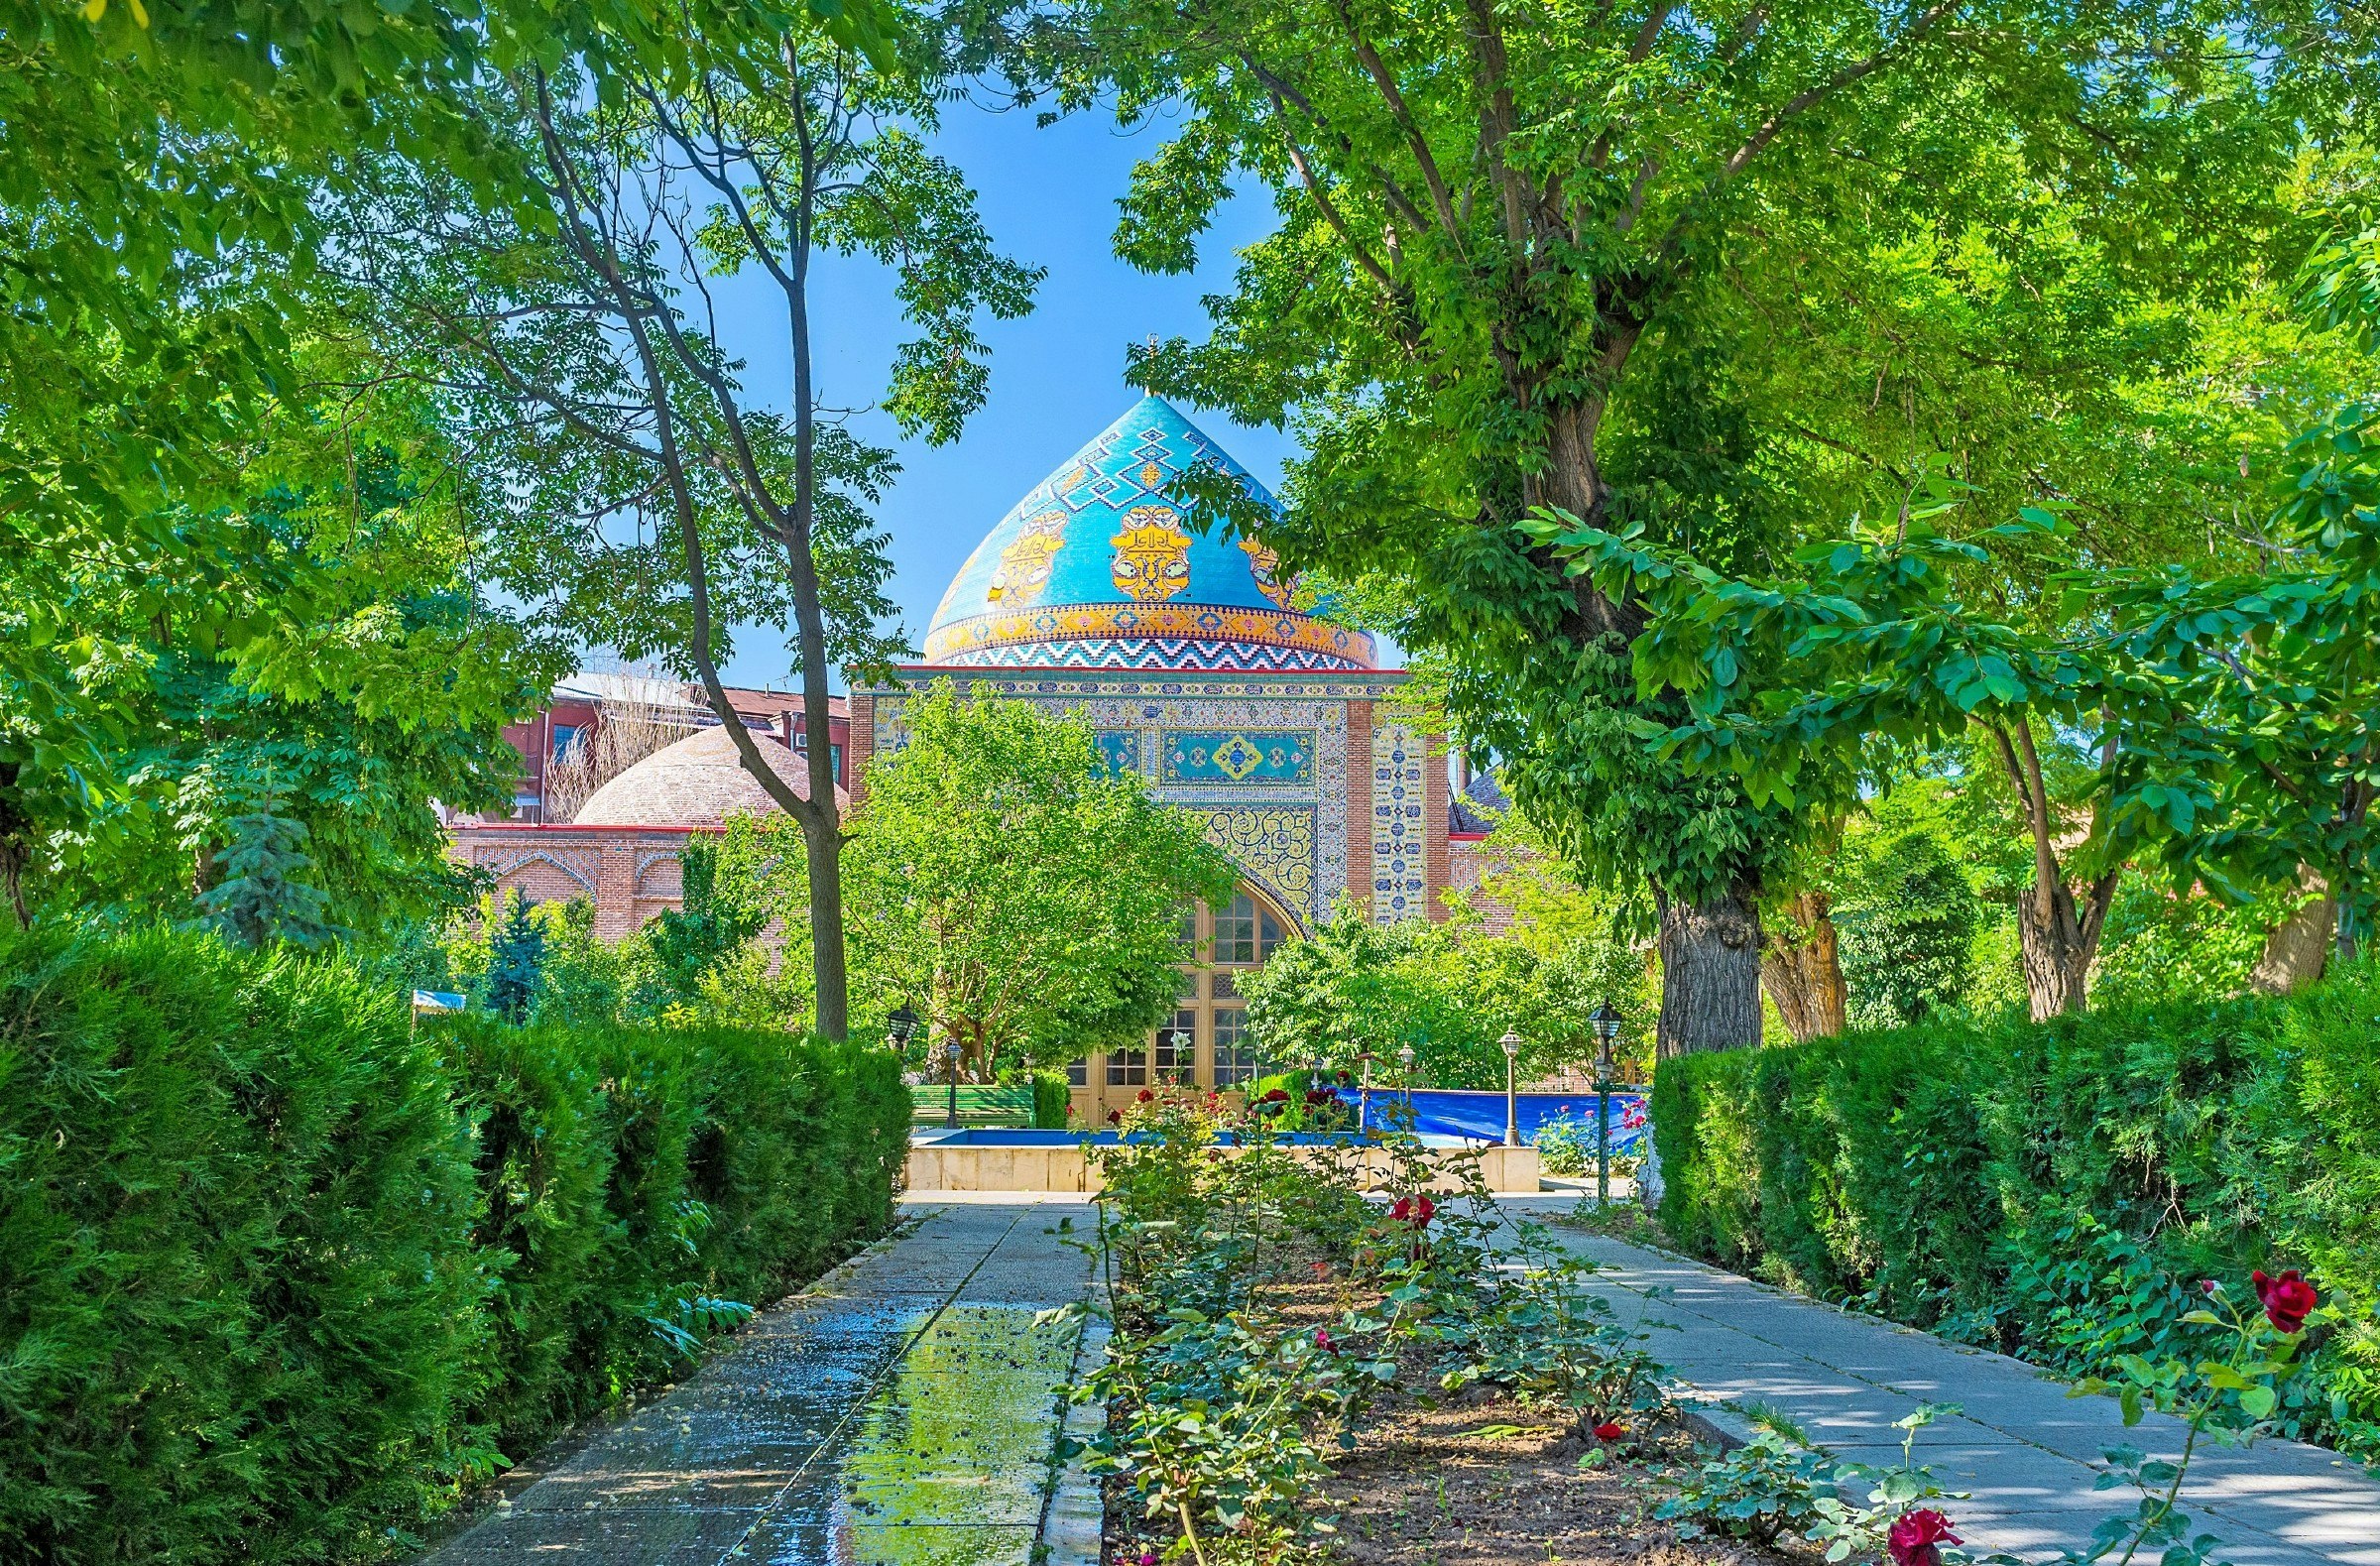 The shady alley of a garden that leads to the Shia Blue Mosque, decorated by colorful tiles, Yerevan, Armenia